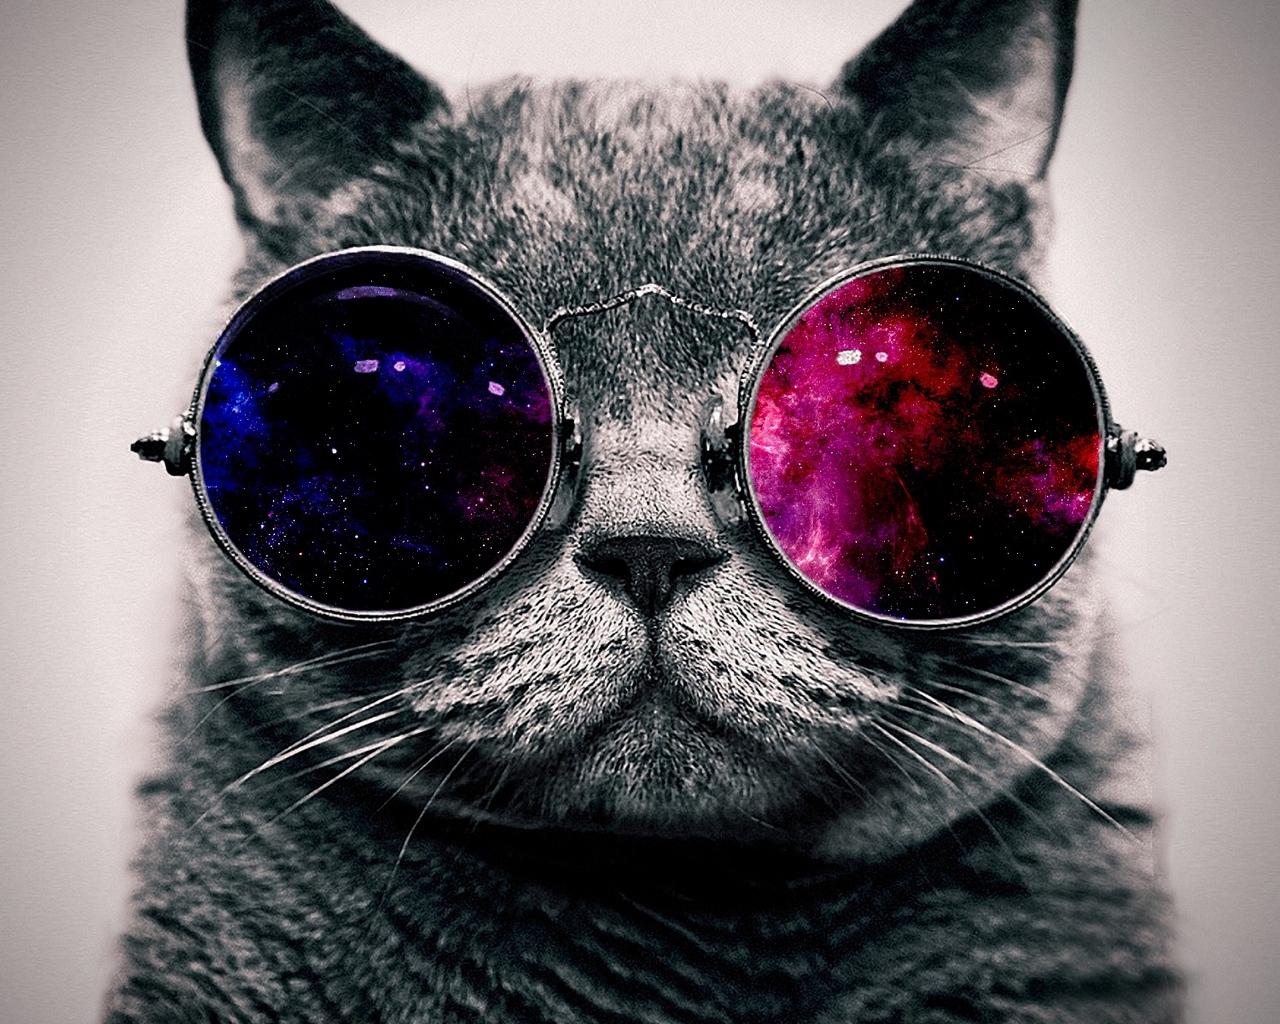 Download wallpaper 1280x1024 cat, face, glasses, thick standard 5:4